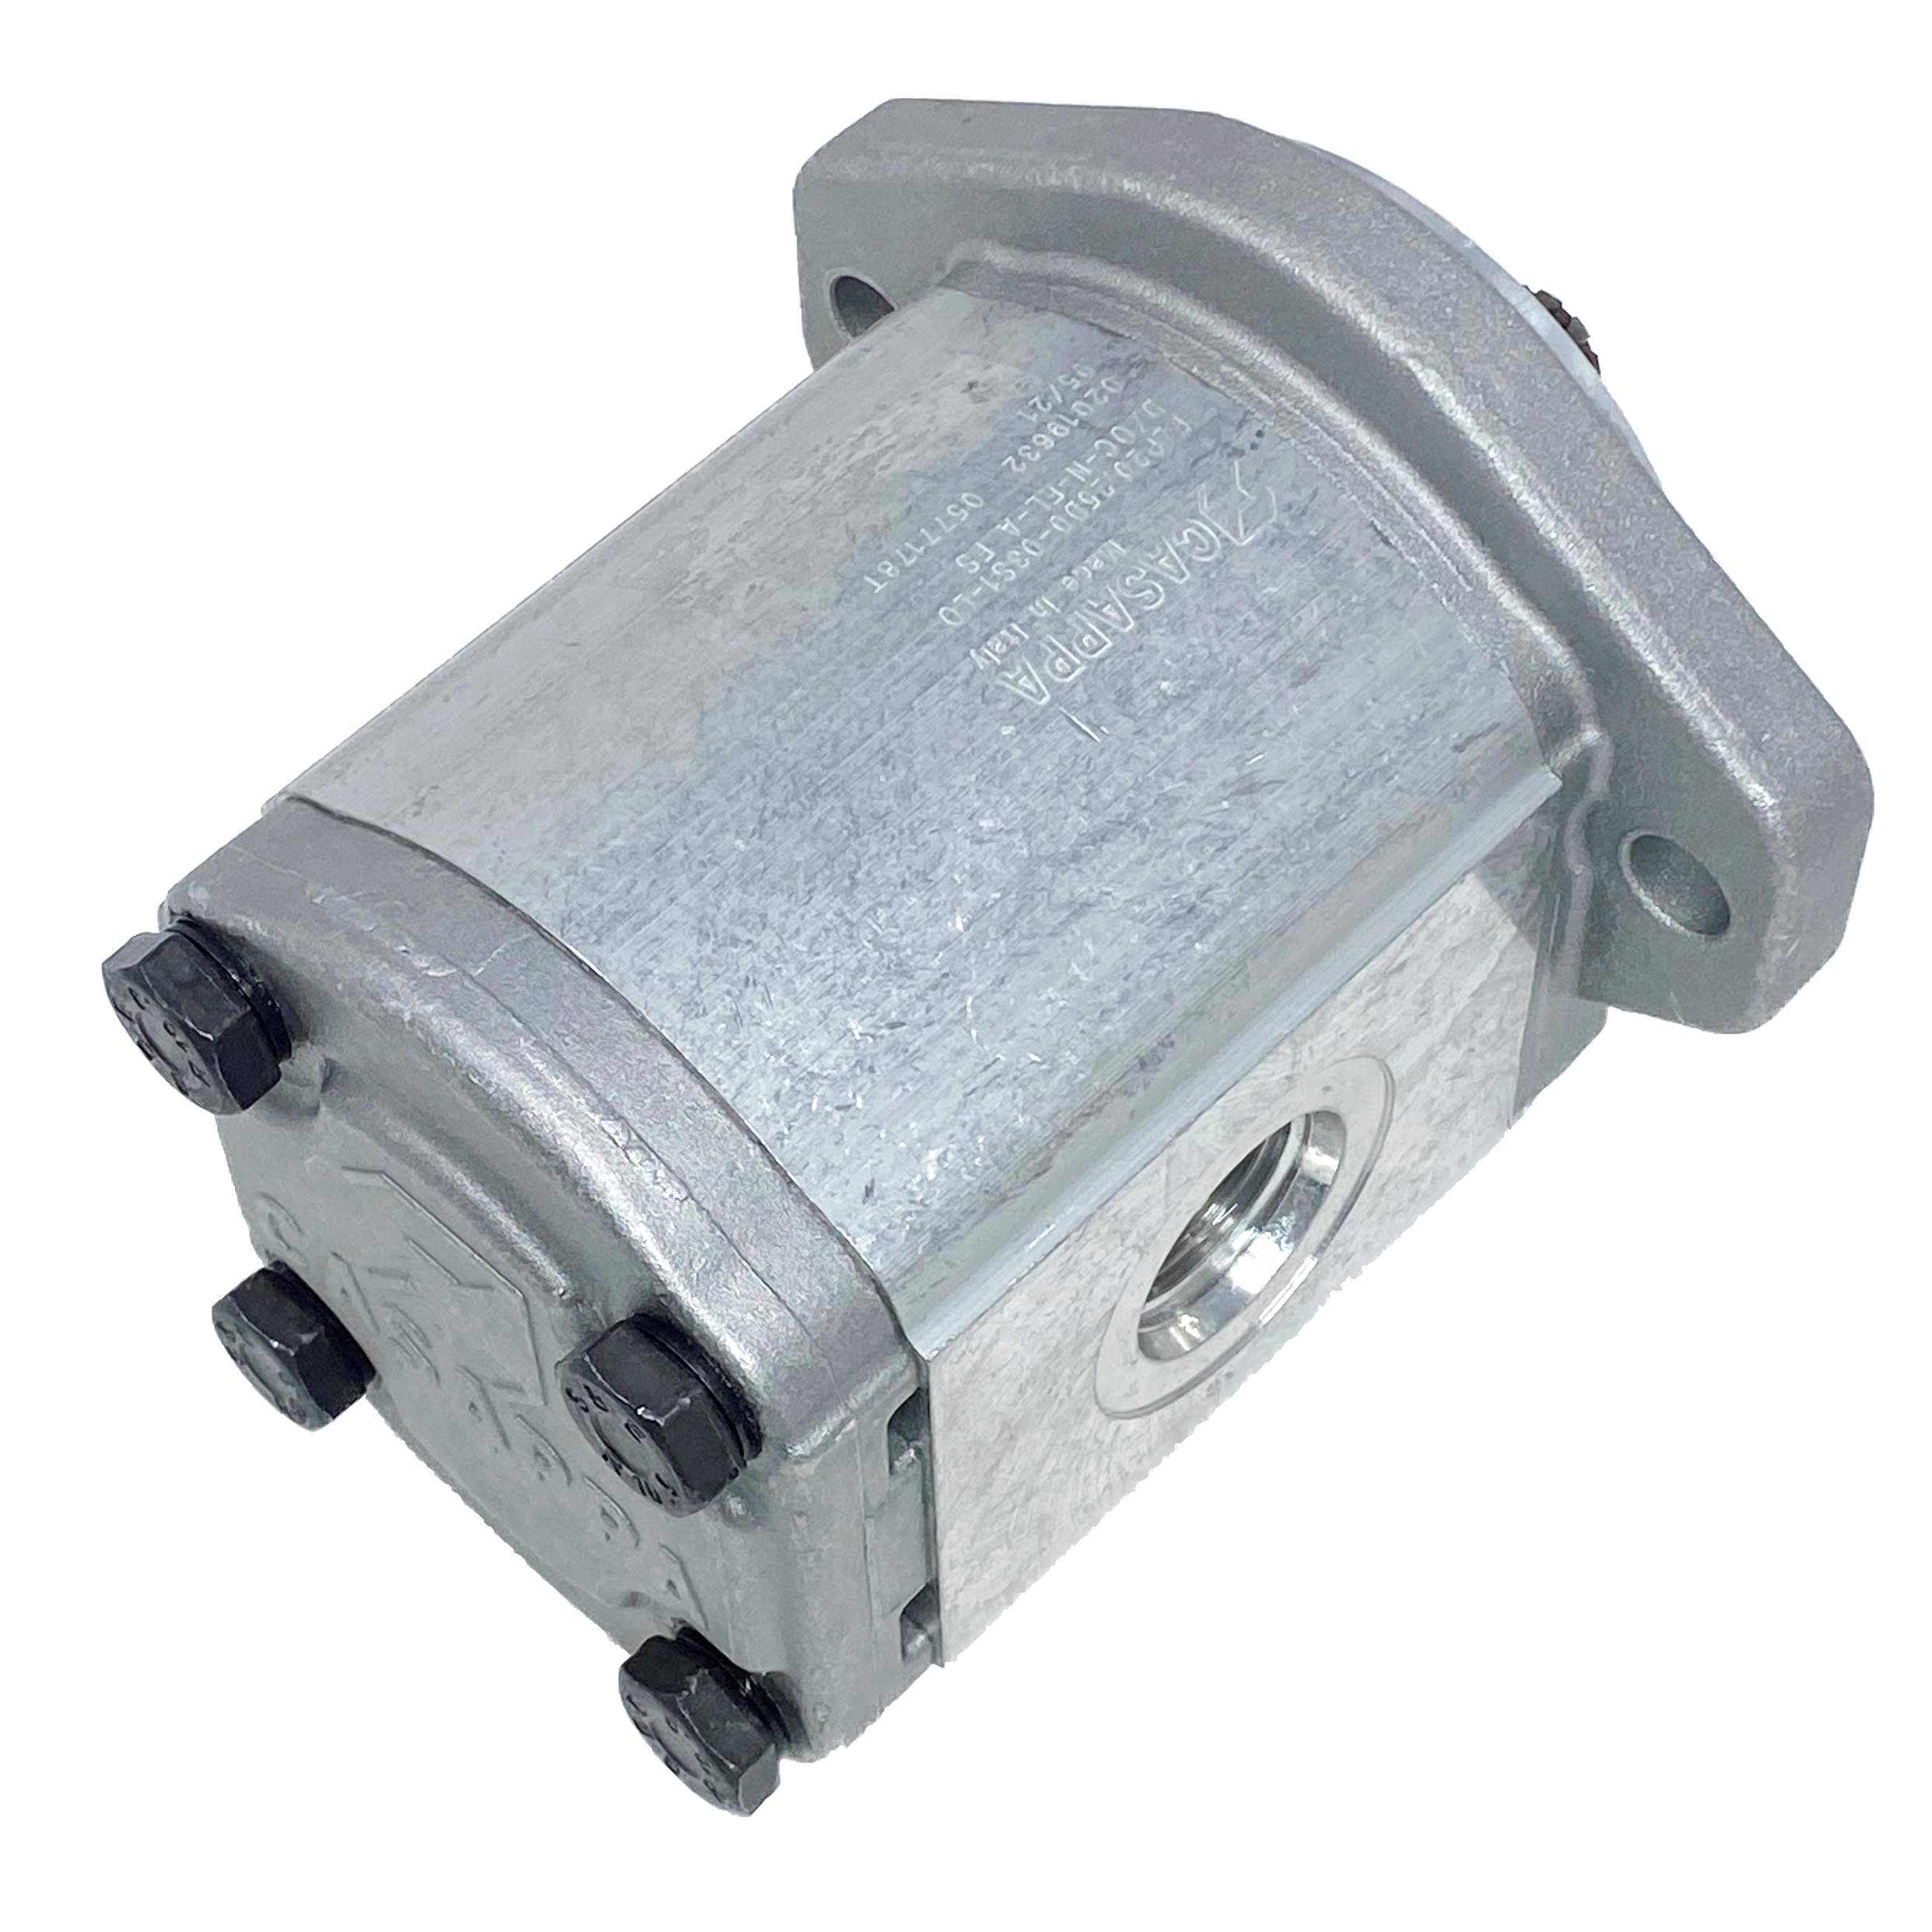 PHM20.25B0-03S9-LOC/OG-N-EL : Casappa Polaris Gear Motor, 26.42cc, 3335psi Rated, 3000RPM, Reversible Interior Drain, 9T 16/32dp Shaft, SAE A 2-Bolt Flange, 0.625 (5/8") #10 SAE Inlet, 1.25" #20 SAE Outlet, Cast Iron Body, Aluminum Flange